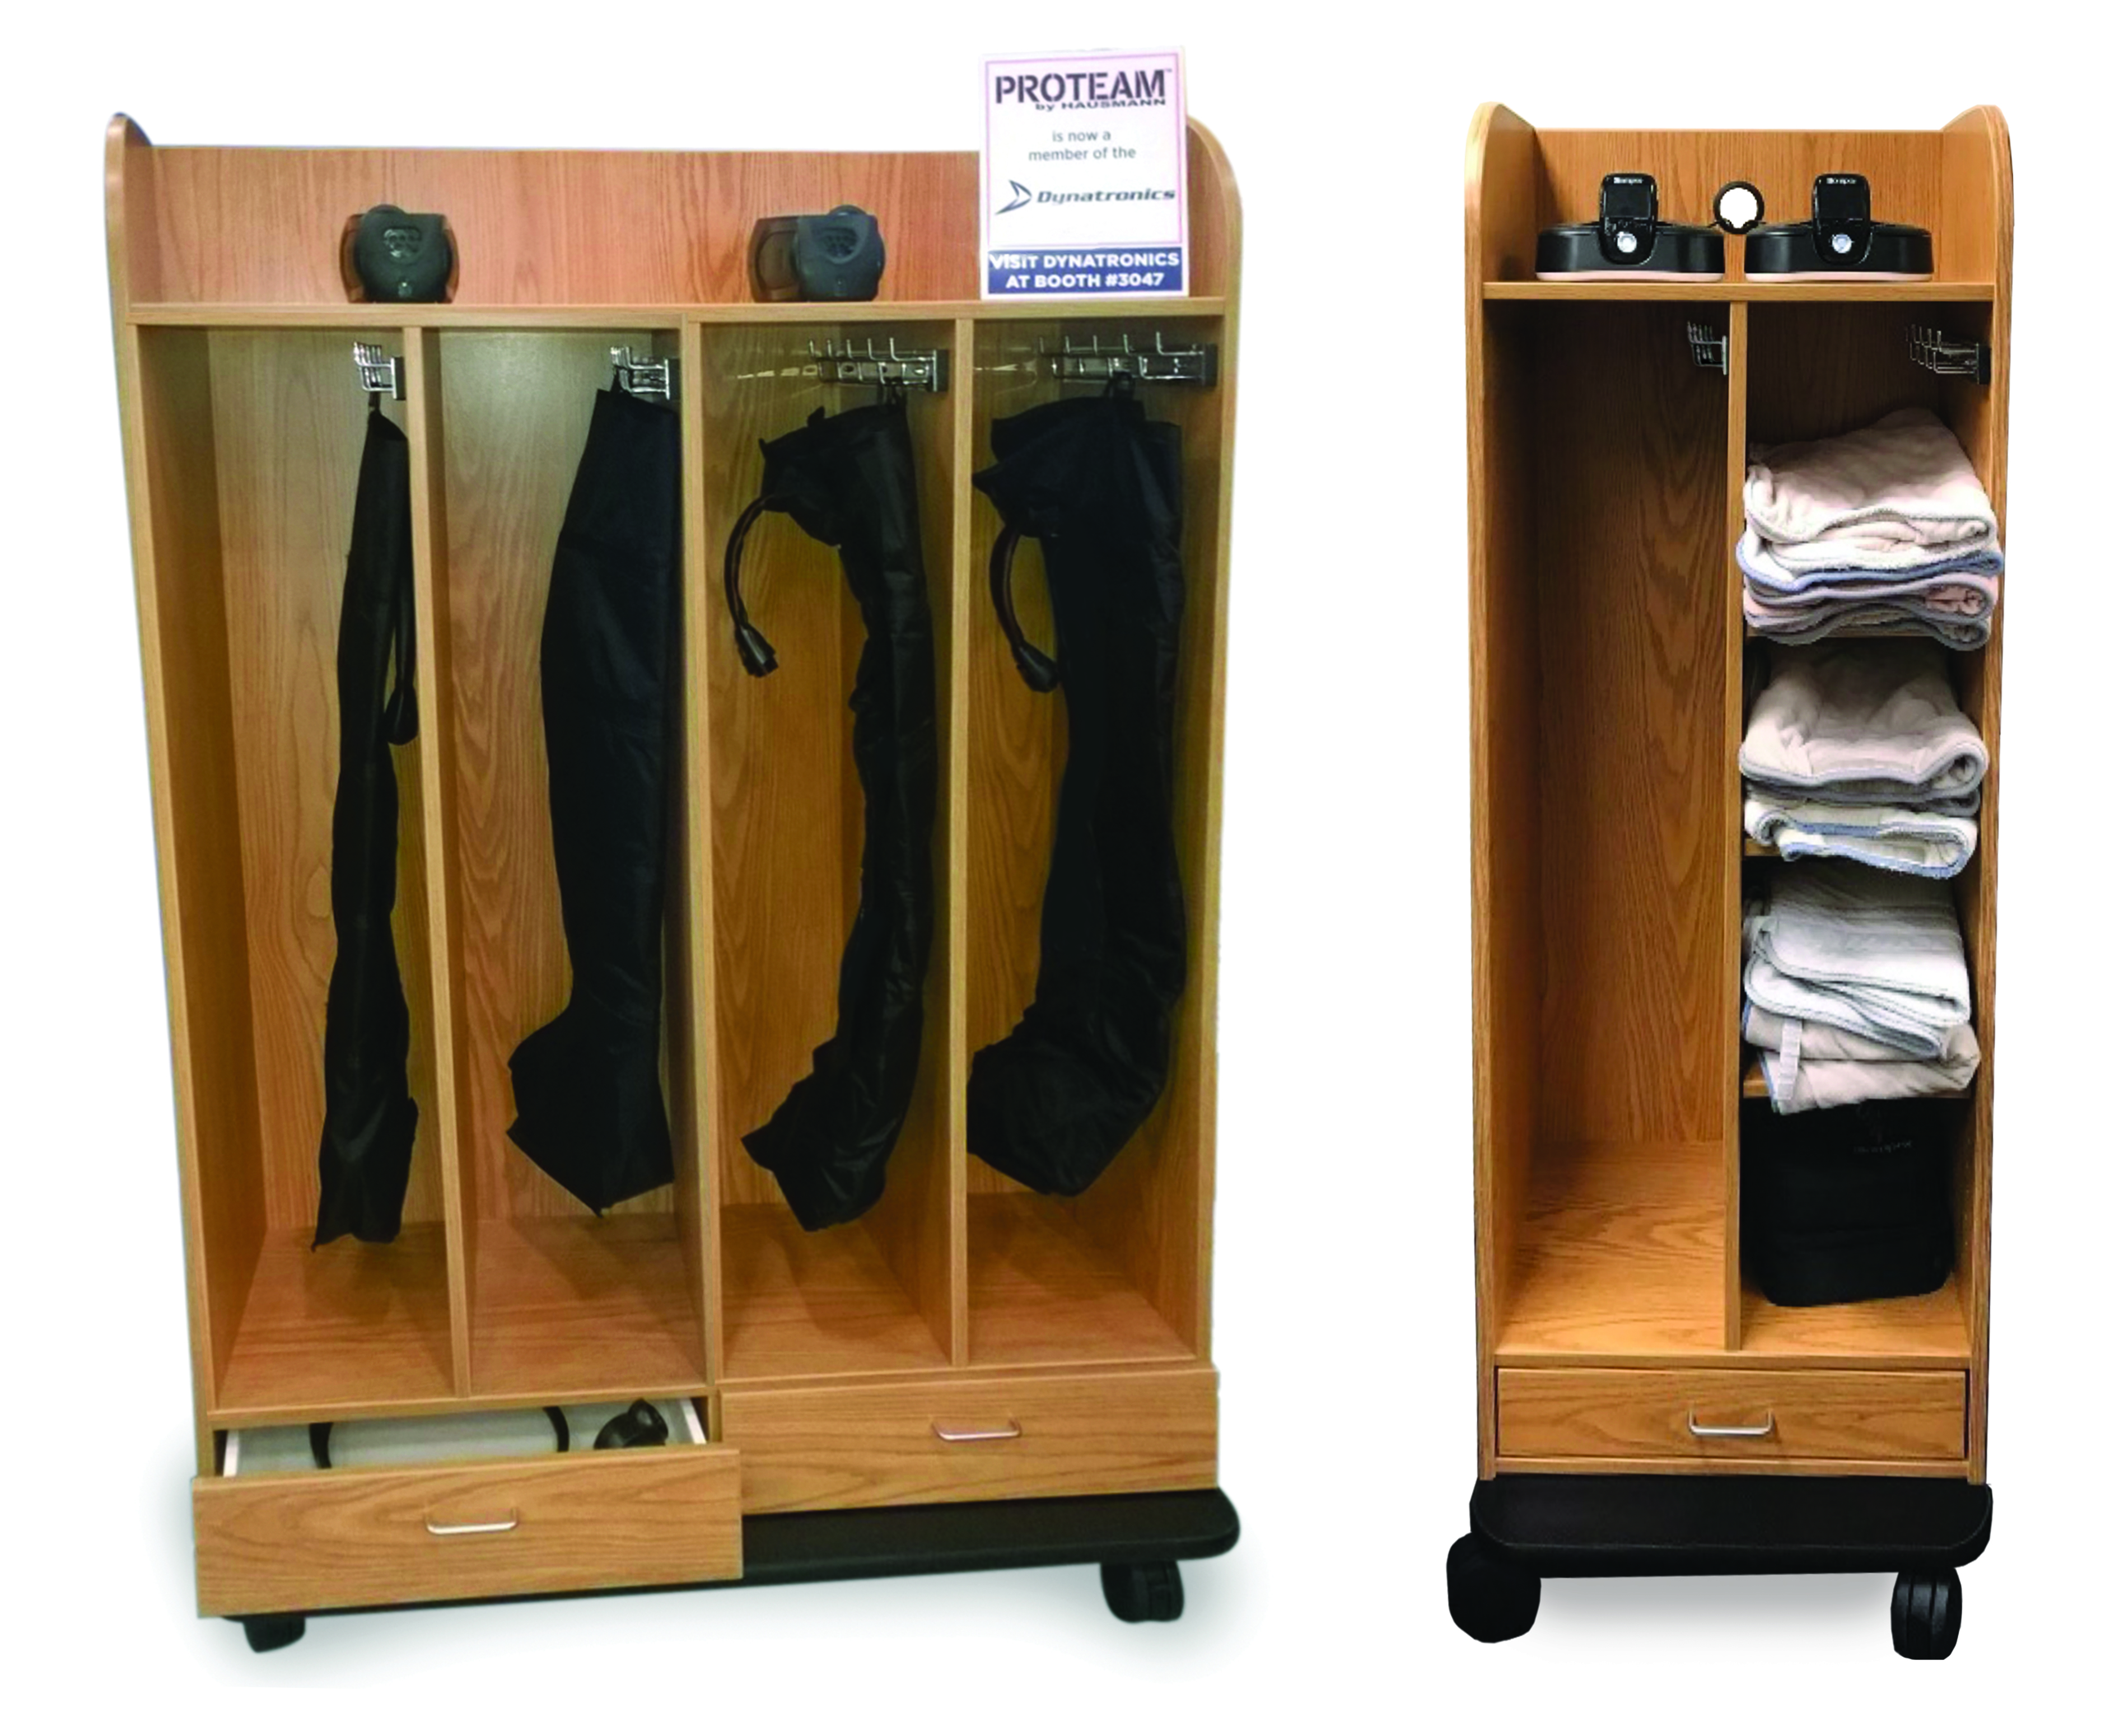 PROTEAM – Recovery Carts & Cabinets